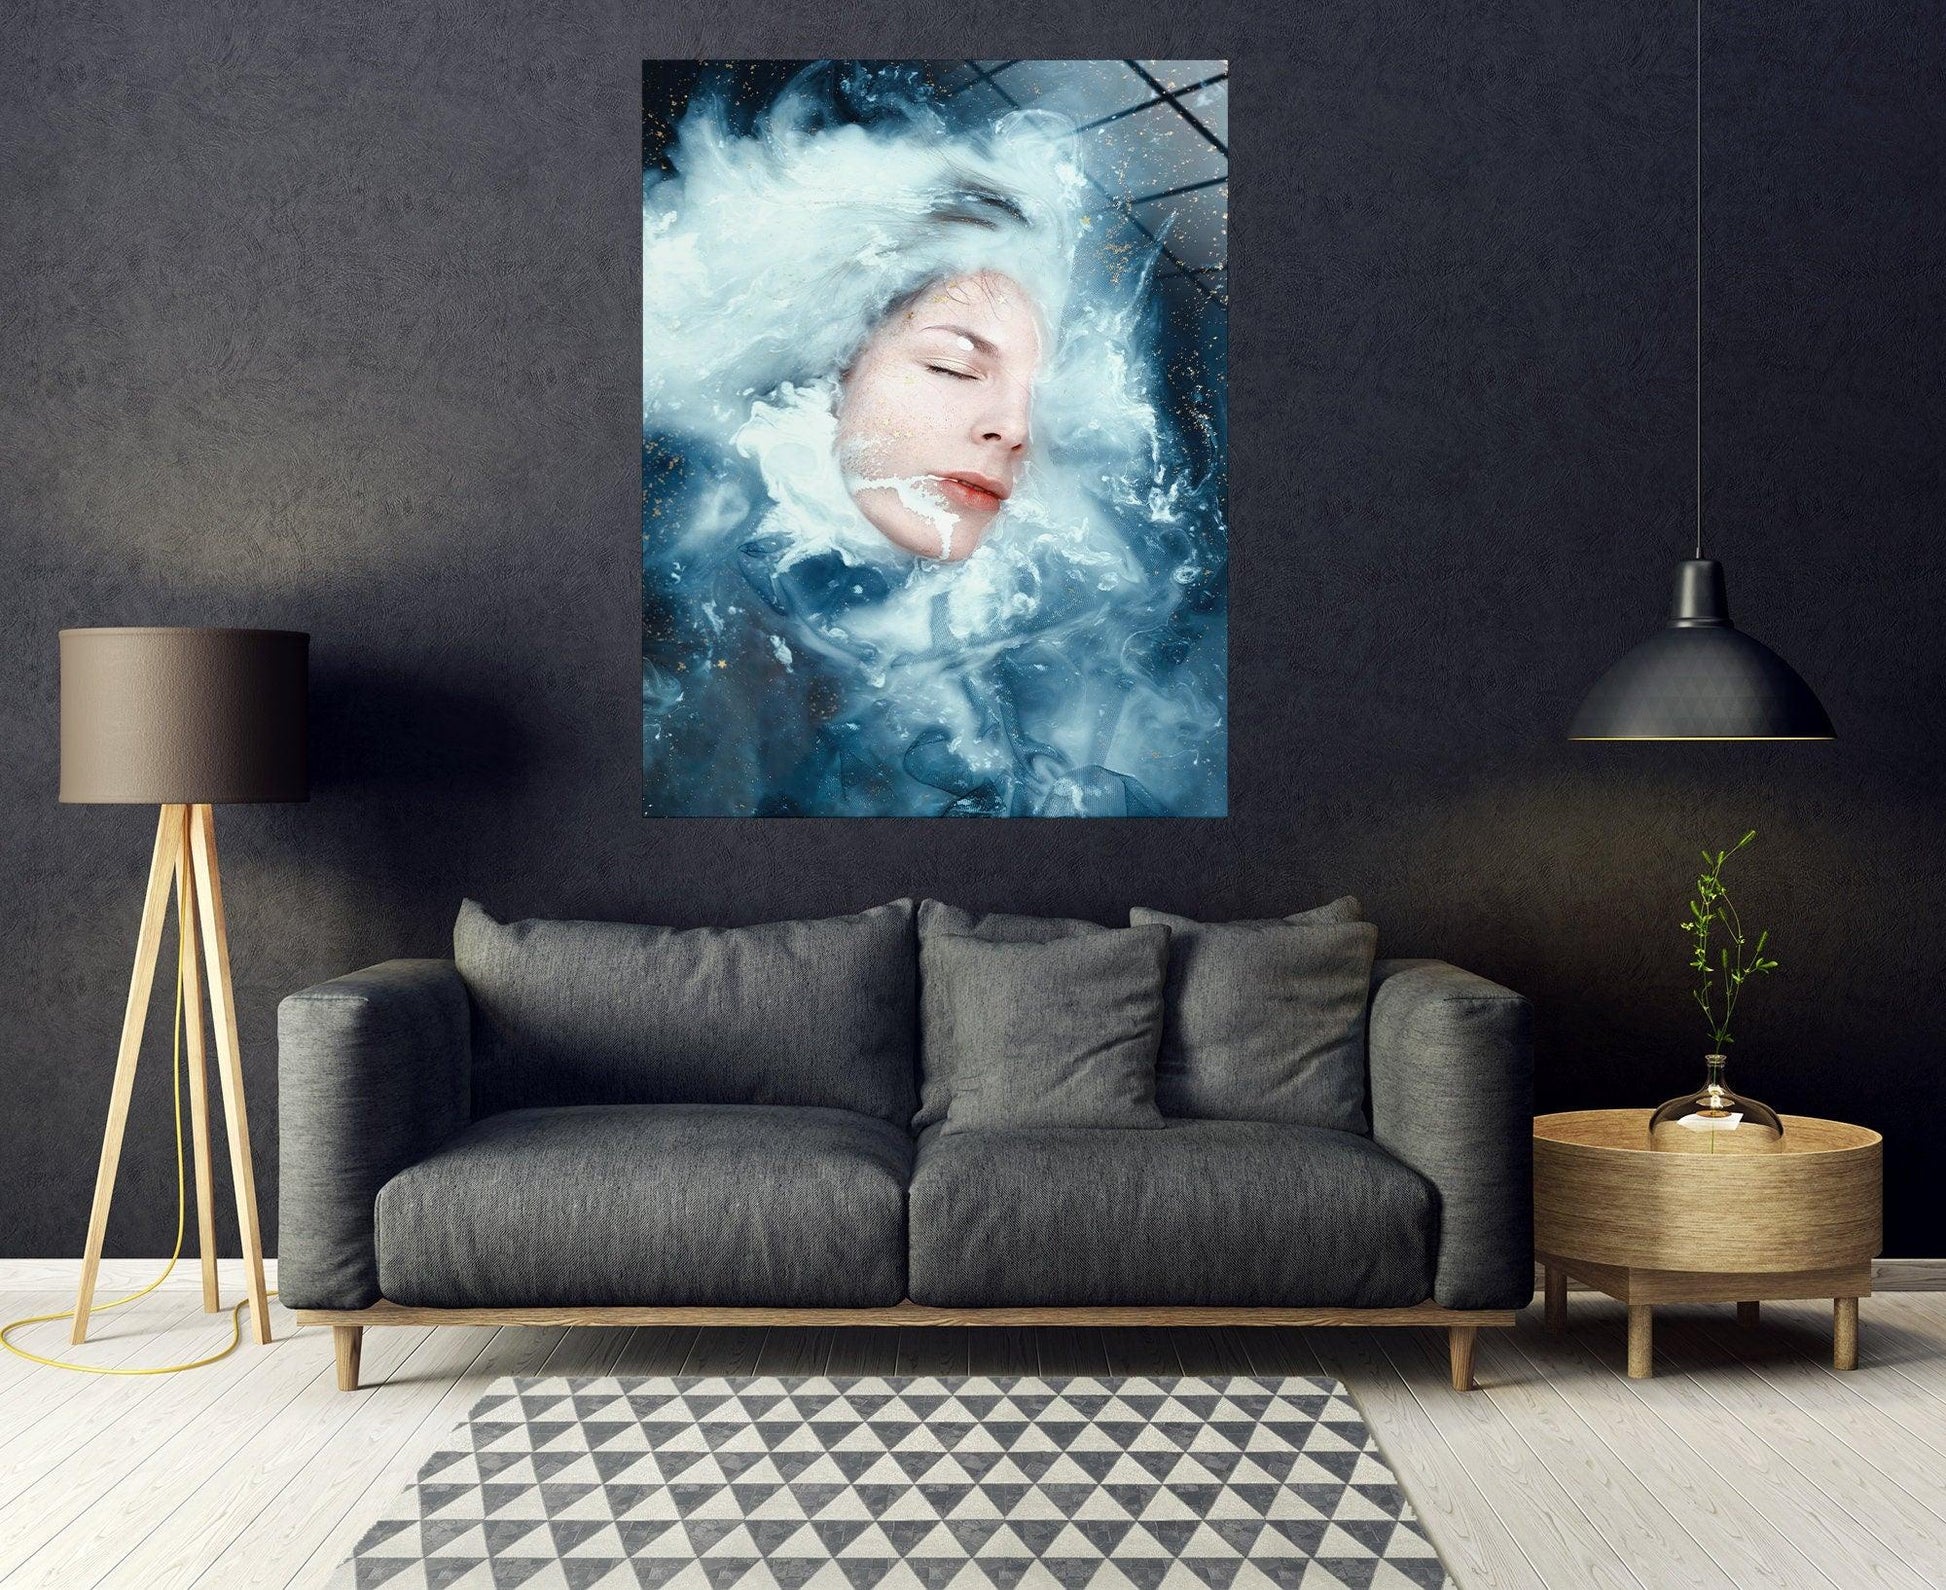 woman face canvas glass wall art, Sexual Nude Perverse Art, Girl Ass In Vivid Color, Living Room Blue Canvas, Bedroom Sex Room Poster - TrendiArt